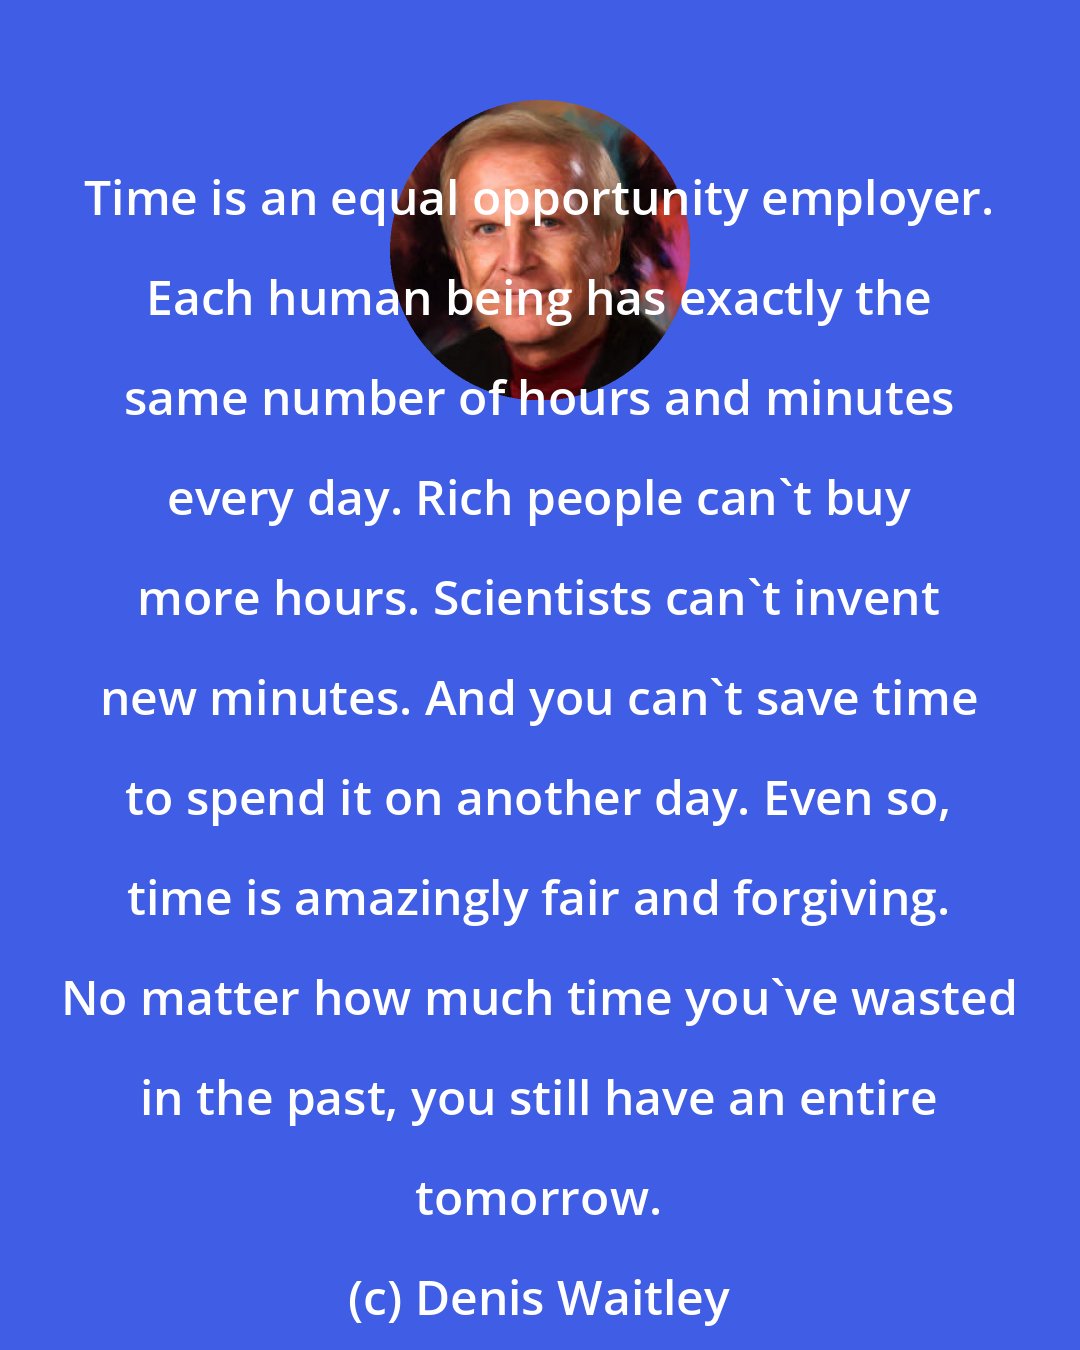 Denis Waitley: Time is an equal opportunity employer. Each human being has exactly the same number of hours and minutes every day. Rich people can't buy more hours. Scientists can't invent new minutes. And you can't save time to spend it on another day. Even so, time is amazingly fair and forgiving. No matter how much time you've wasted in the past, you still have an entire tomorrow.